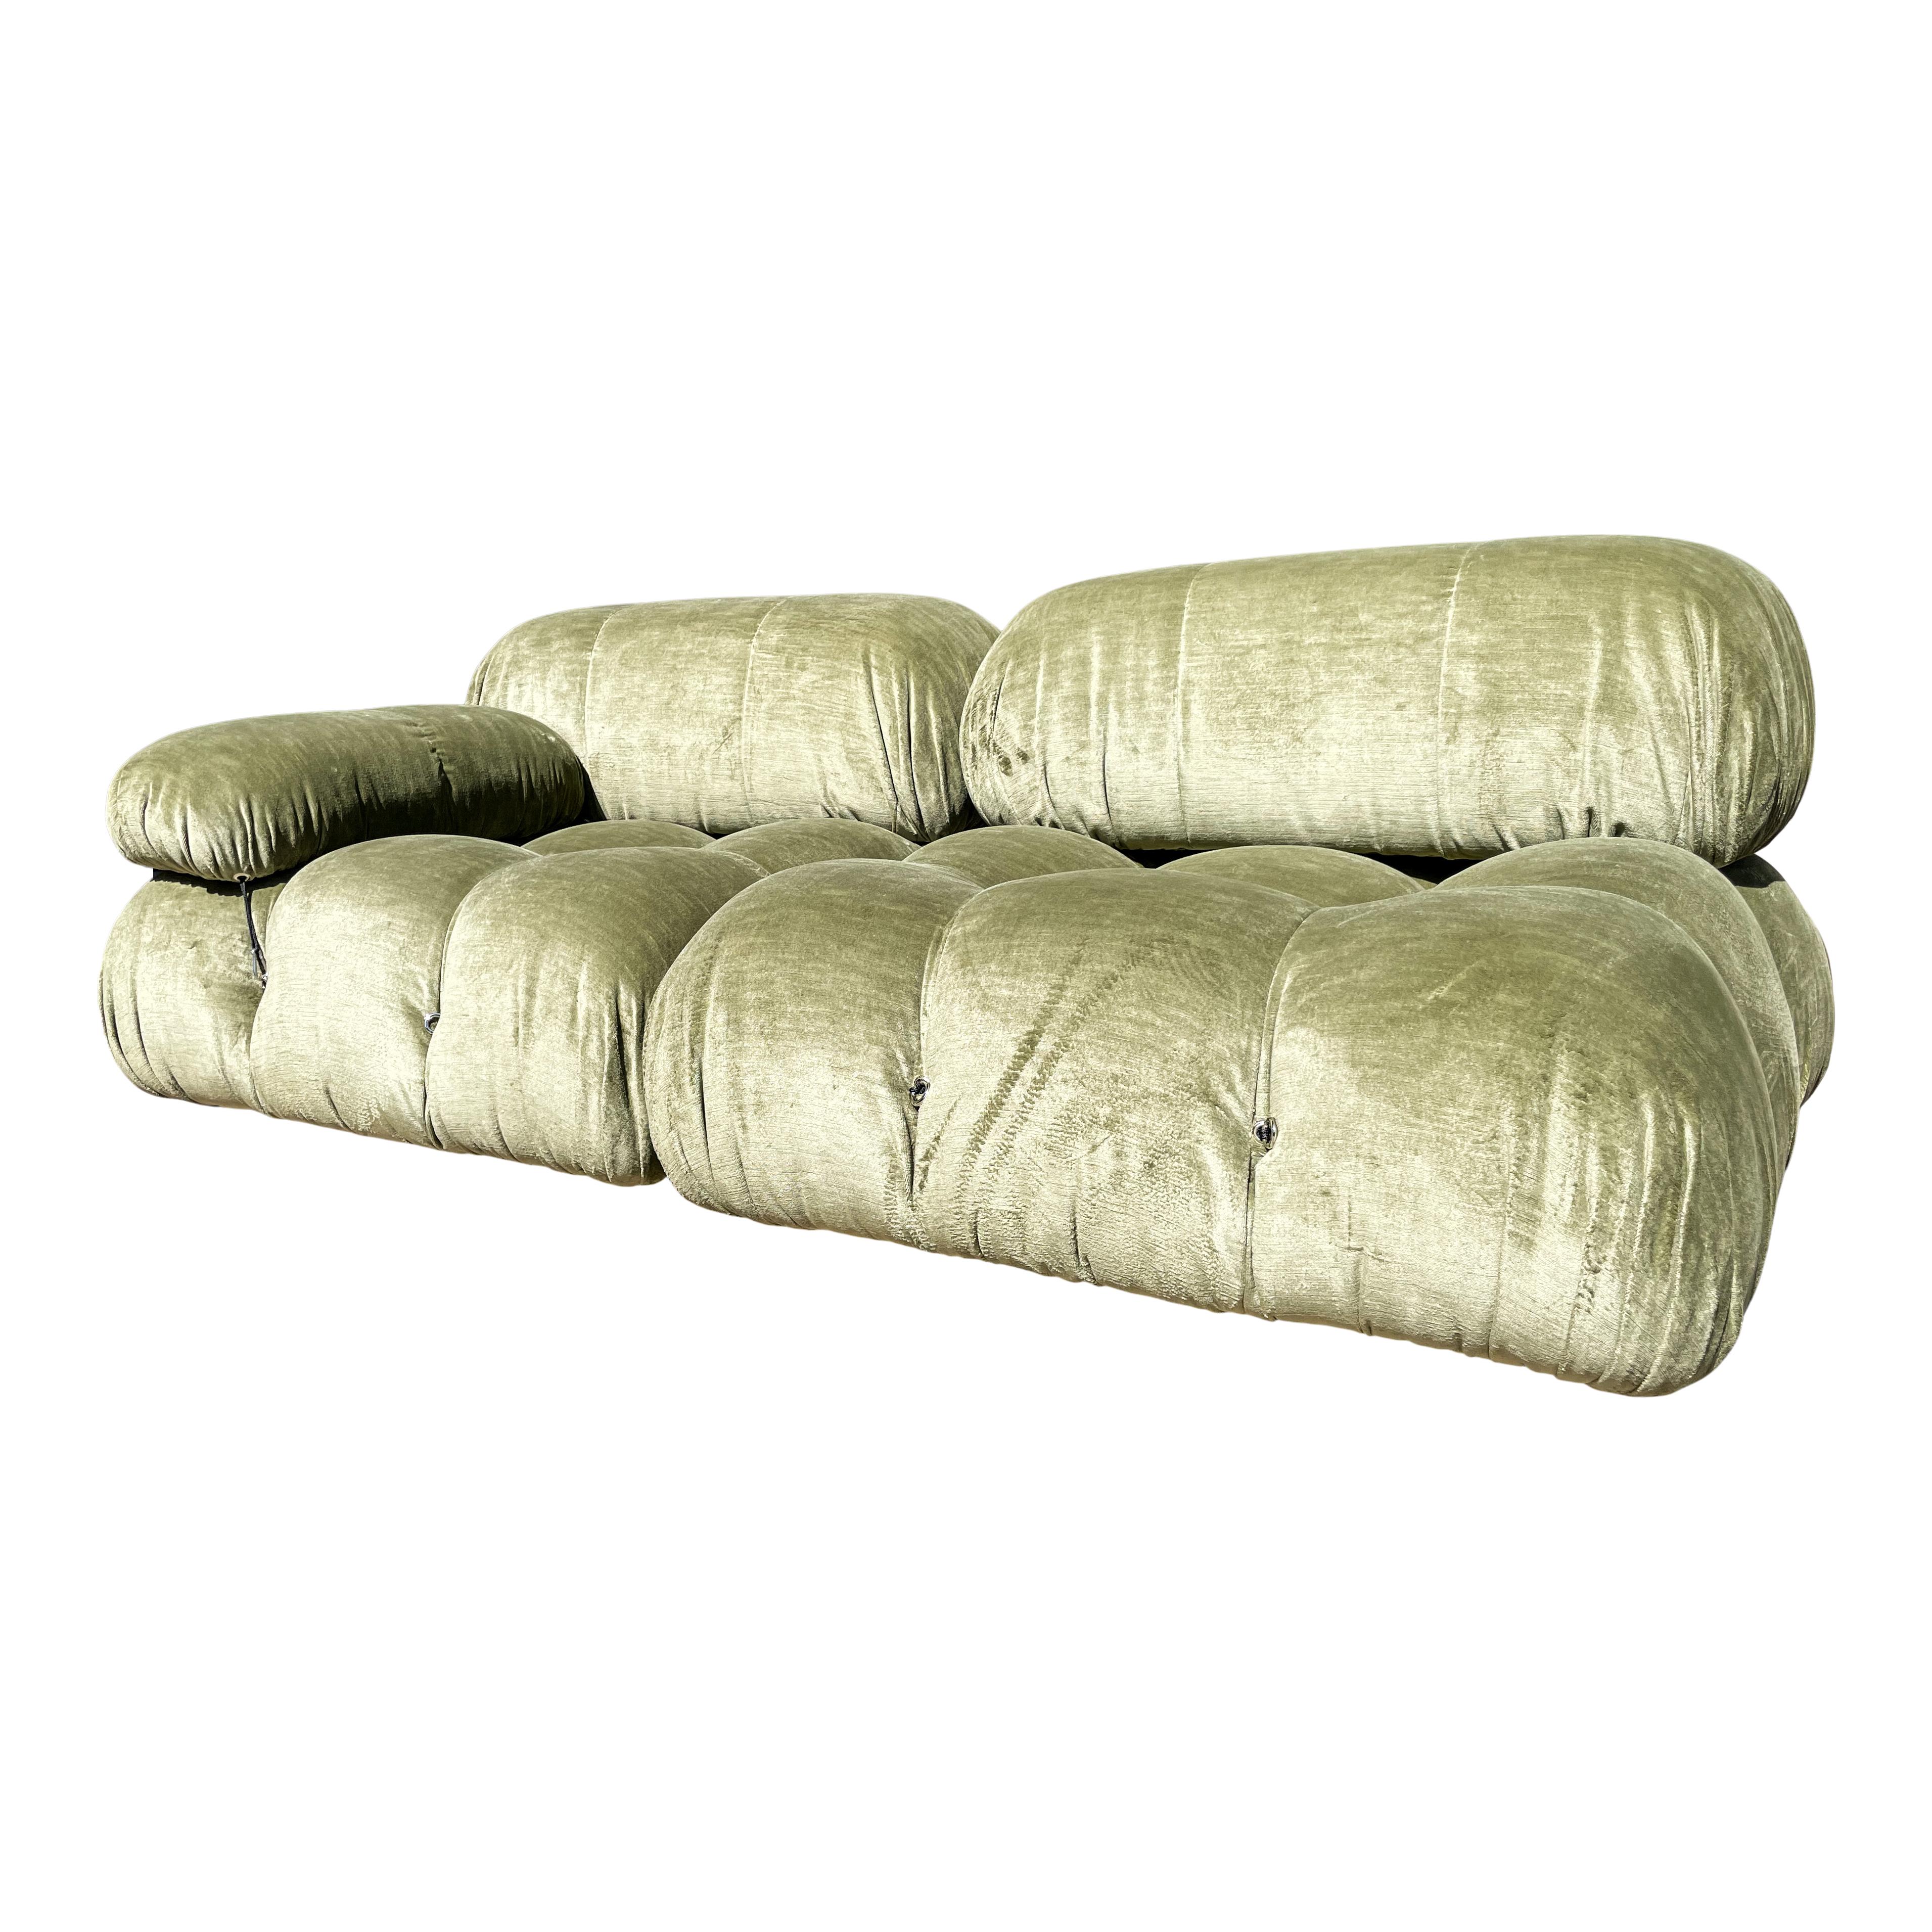 Camaleonda sofa, designed by Mario Bellini and manufactured by B&B Italia in 1972.

The set features two big modules with two backrests and one armrest.

Green linen velvet upholstery.

Fully restored in Italy.

The sofa is very comfortable, and the